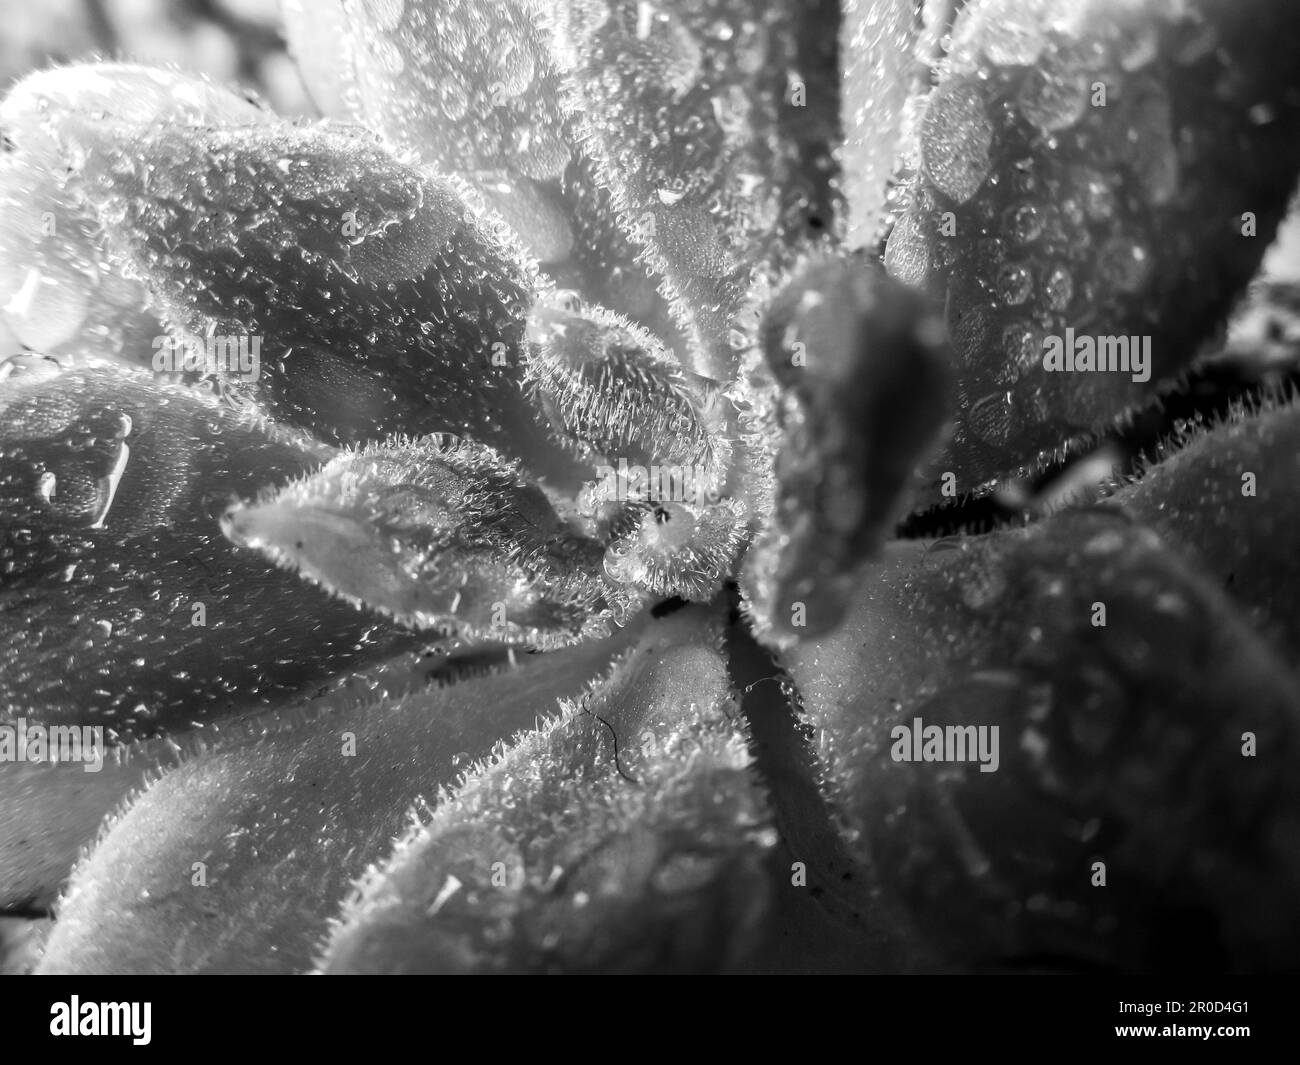 Close-up of an Echeveria Pilosa covered in water droplets in Black and white Stock Photo